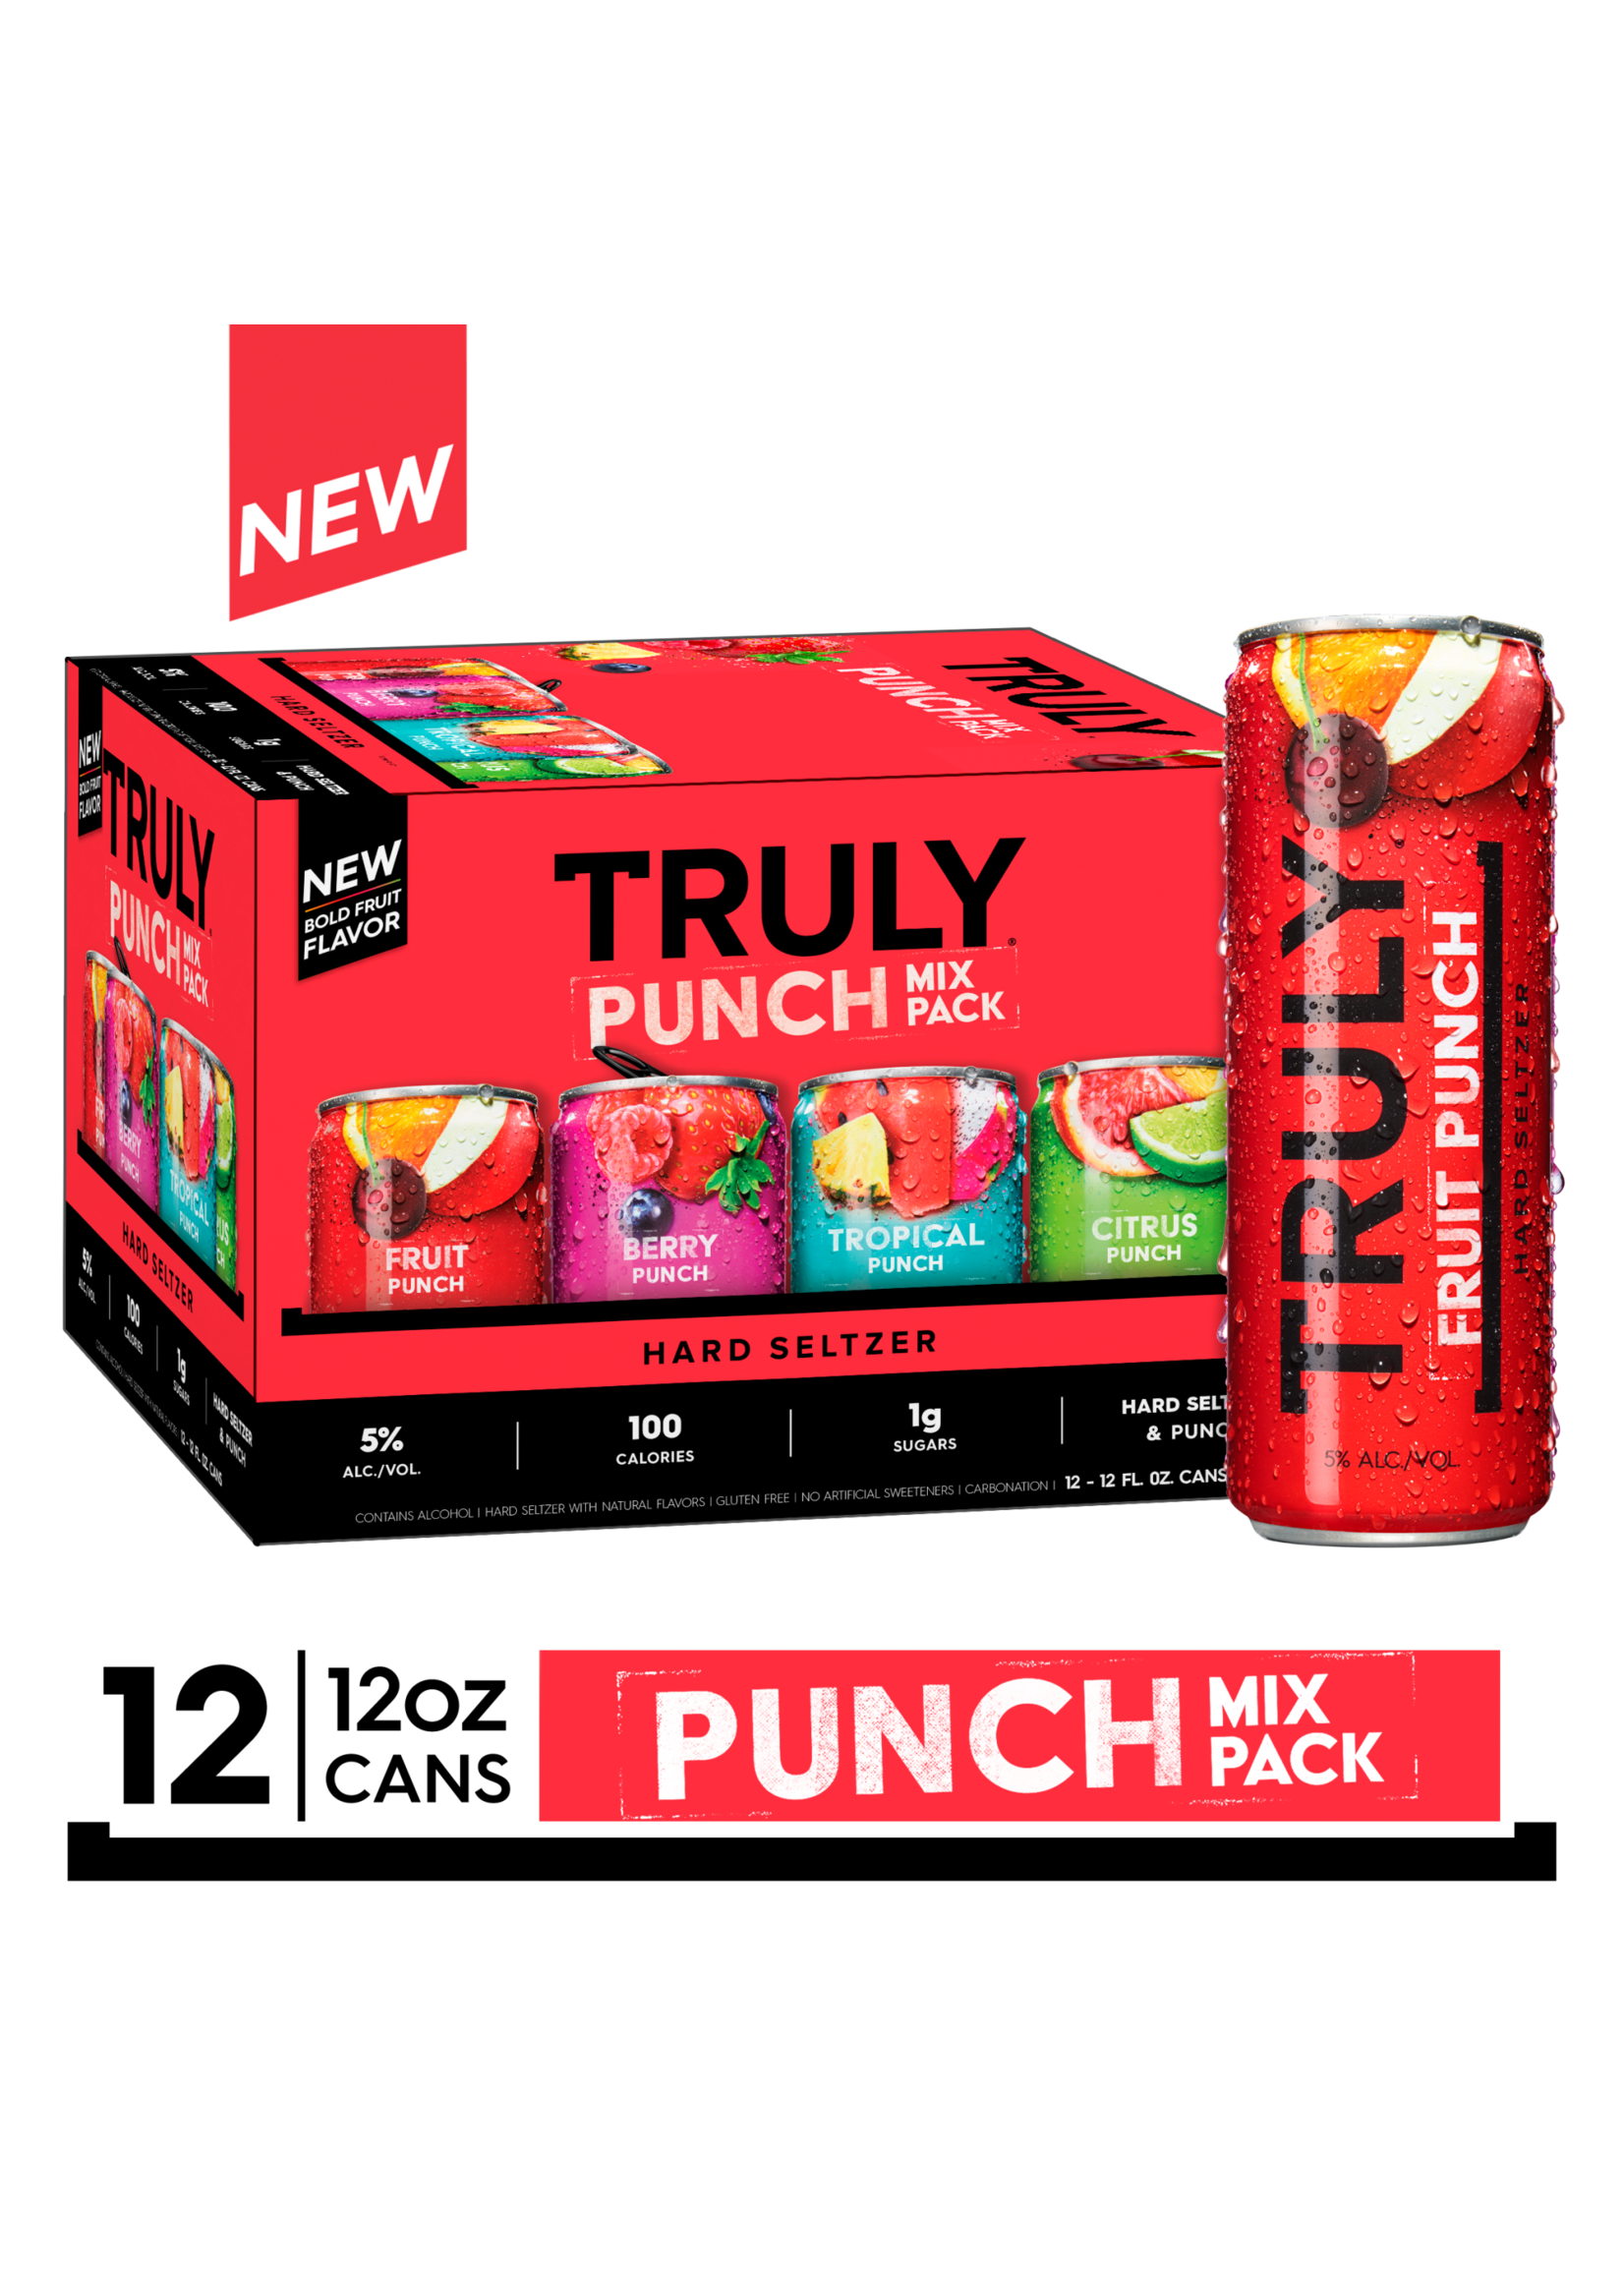 TRULY TRULY PUNCH VARIETY 12PK